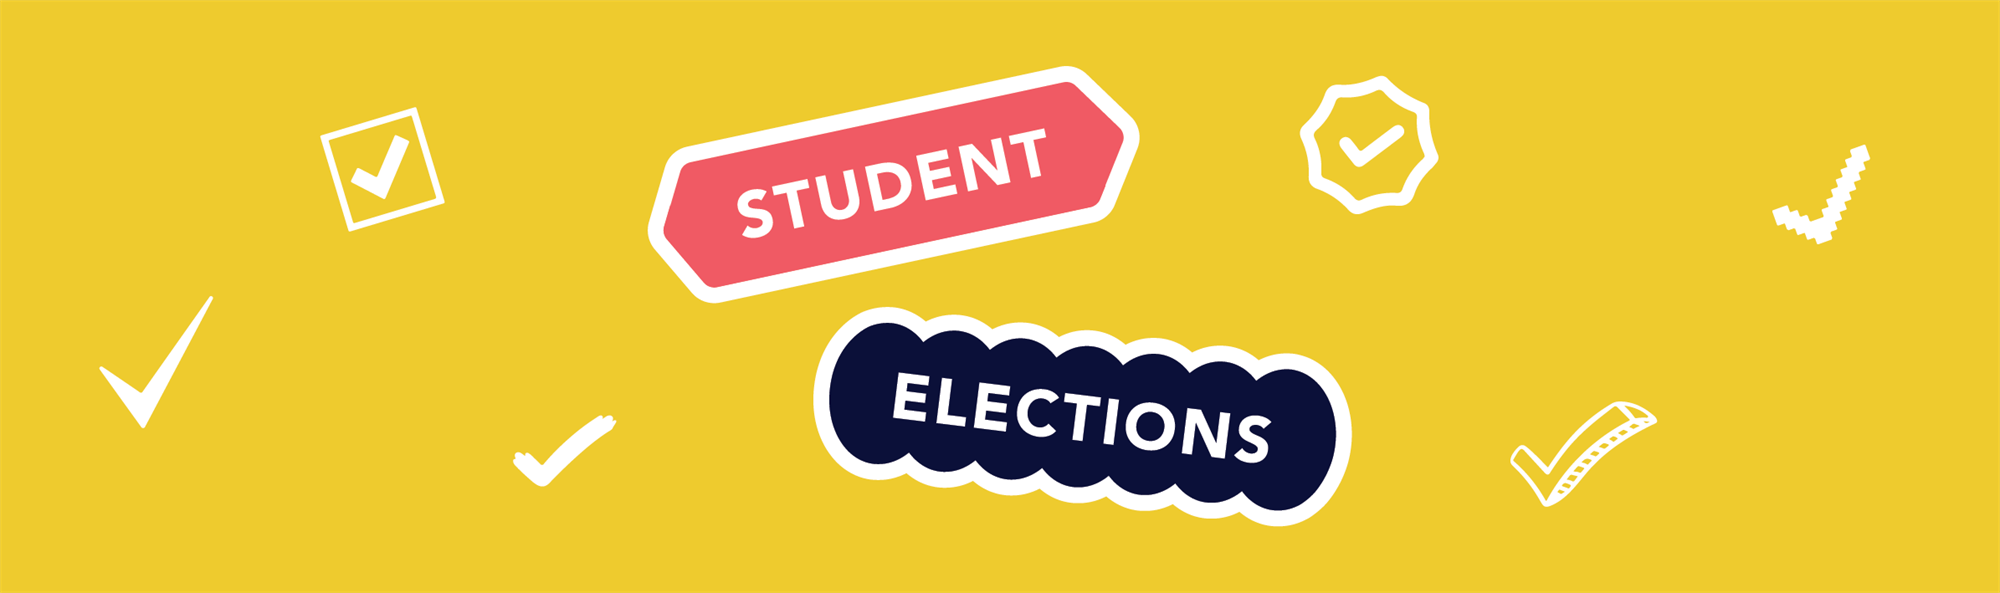 This is your chance to choose which students run and lead the Students' Union. Elected students set the direction of the Students' Union, decide on student policy, run campaigns and projects to improve students' lives.